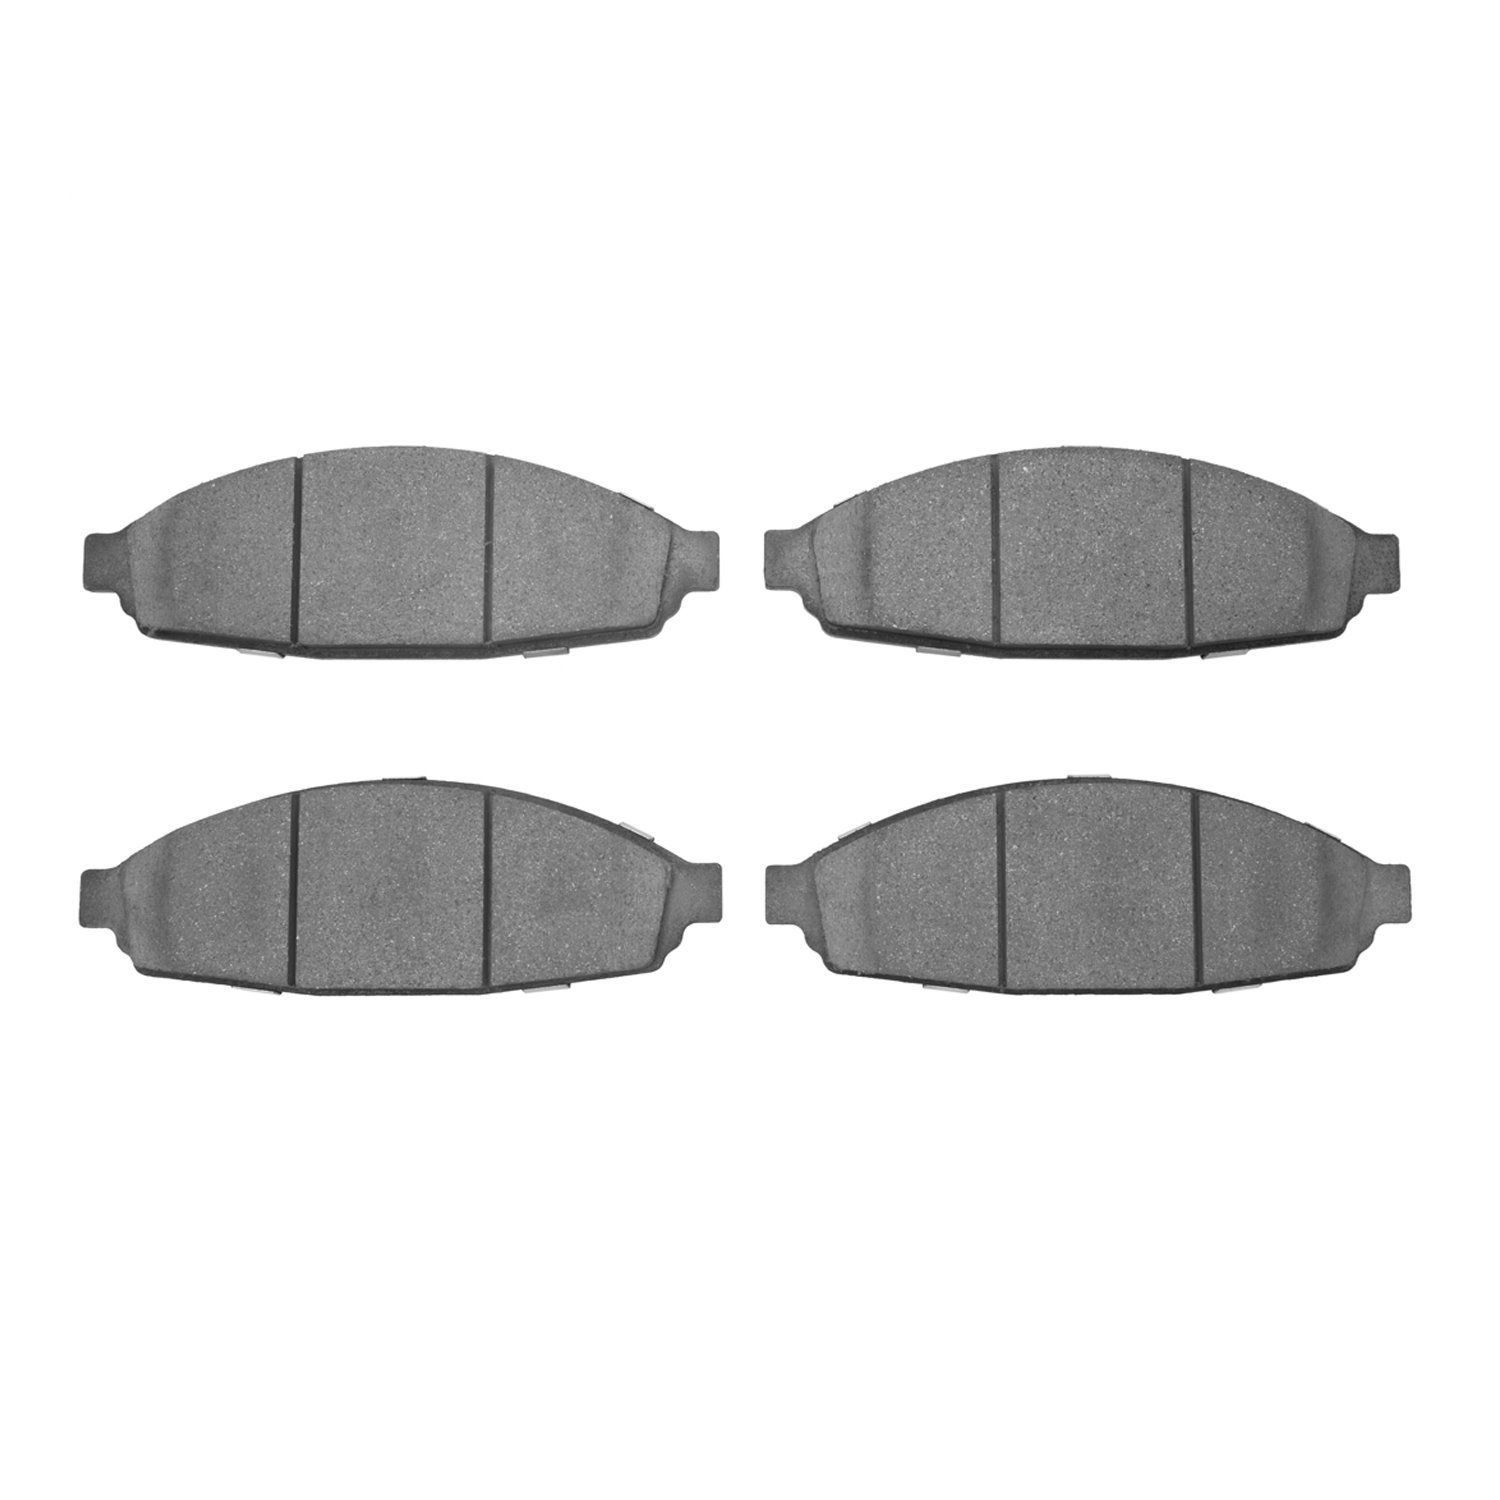 Super-Duty Brake Pads, 2003-2011 Ford/Lincoln/Mercury/Mazda, Position: Front